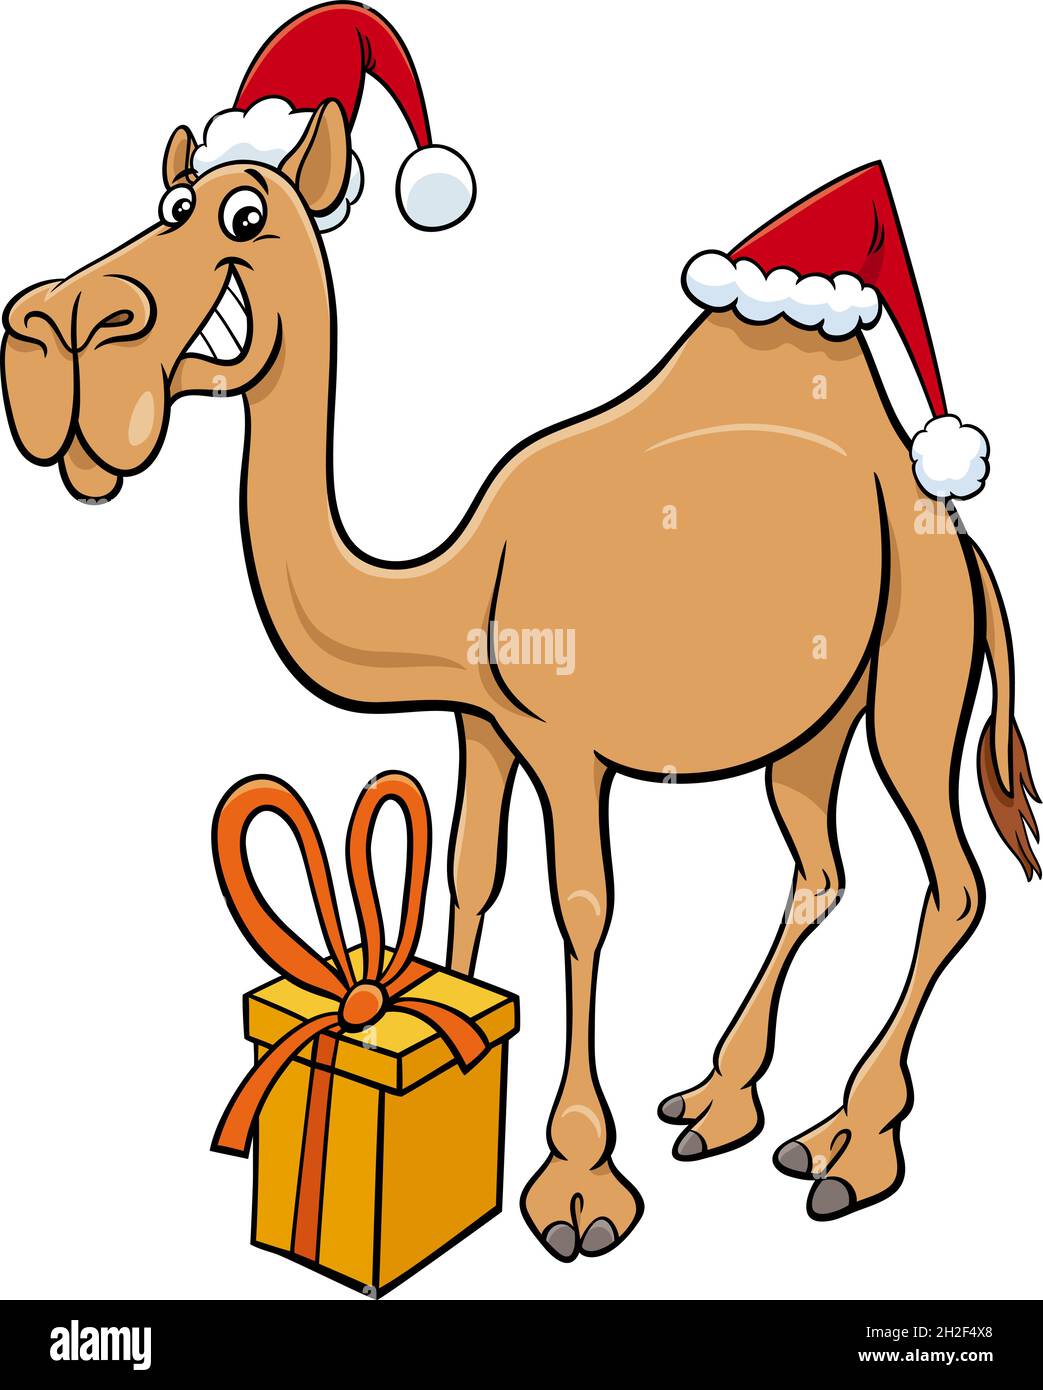 Cartoon illustration of dromedary camel animal character with present on Christmas time Stock Vector